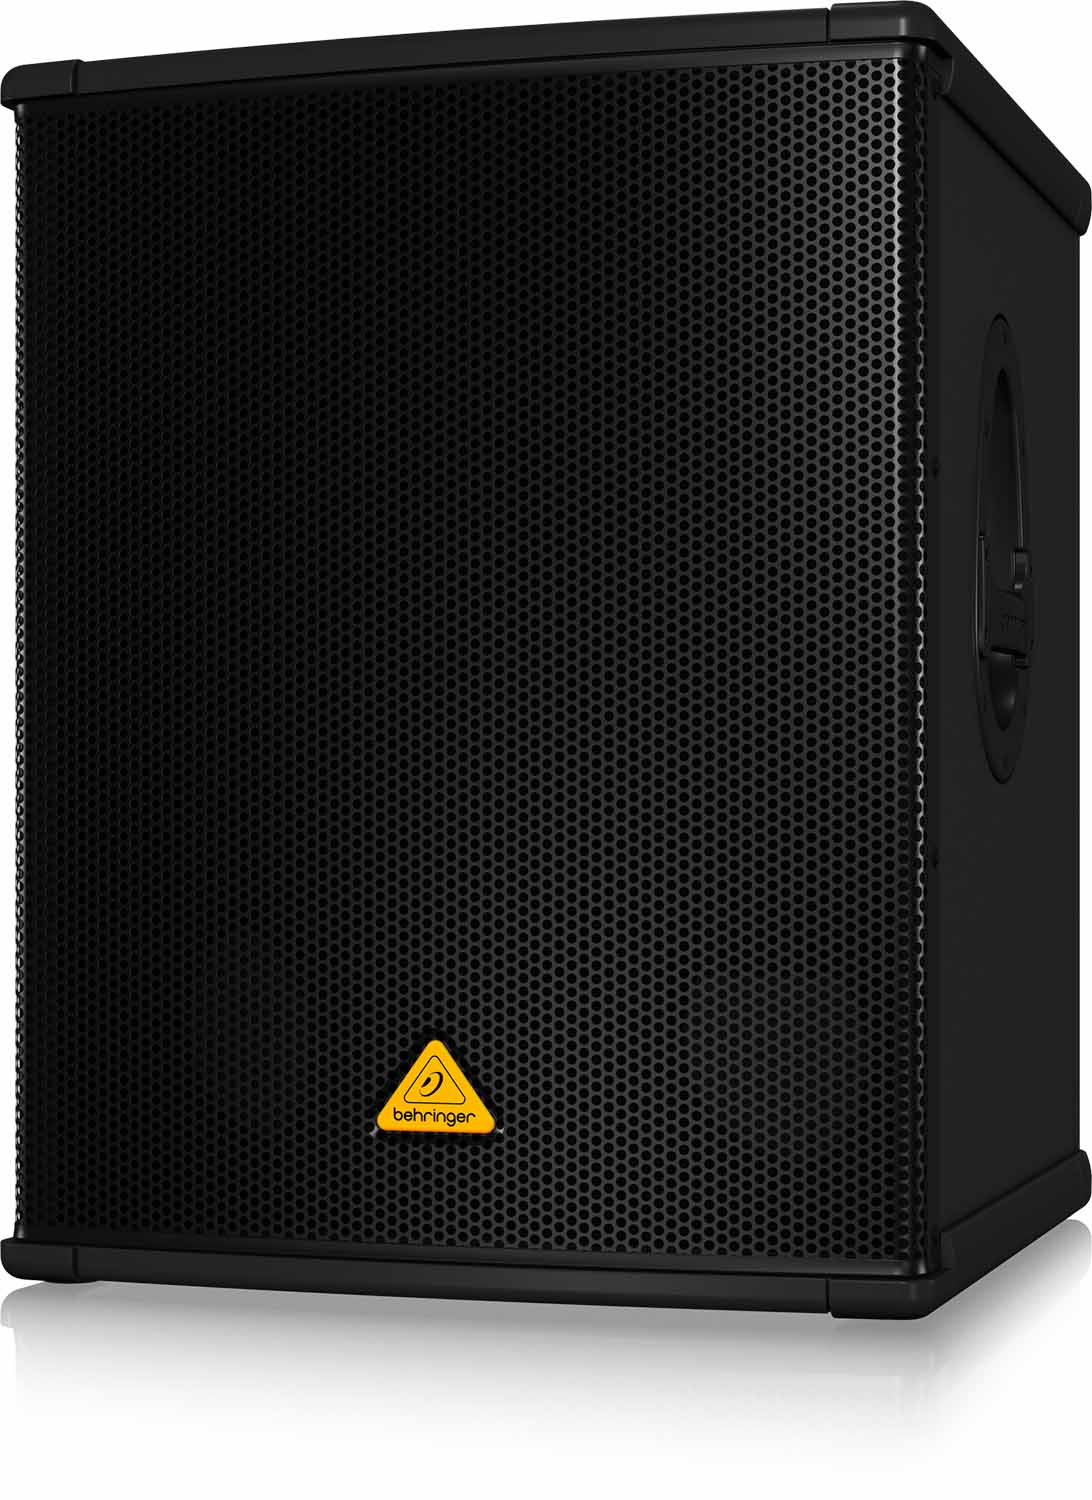 Behringer B1800X PRO Professional 1,800-Watt, 18 Inches PA Subwoofer - Hollywood DJ